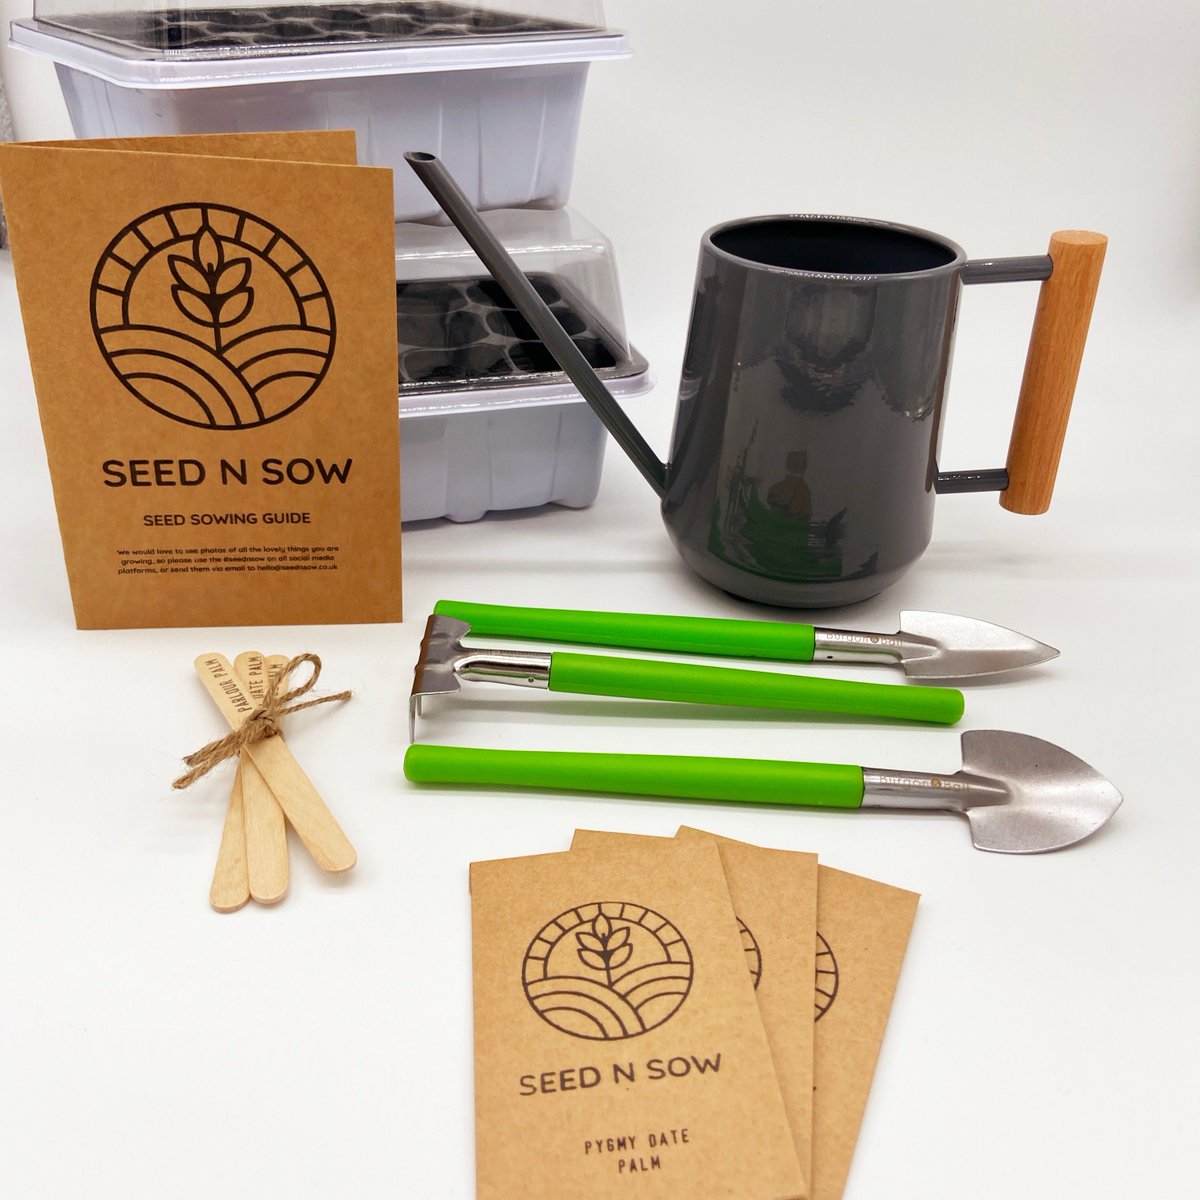 A fabulous gift idea, our Seed n Sow luxury indoor houseplant kit 🎁 

Available to purchase at seednsow.co.uk/collections/gi… 
⠀
#seednsow #gardeningblog #gardeningblogger #gardeningtips #growyourown #gardeninglife #gardeningtipsforbeginners #urbangarden #gardenlife #homegardening